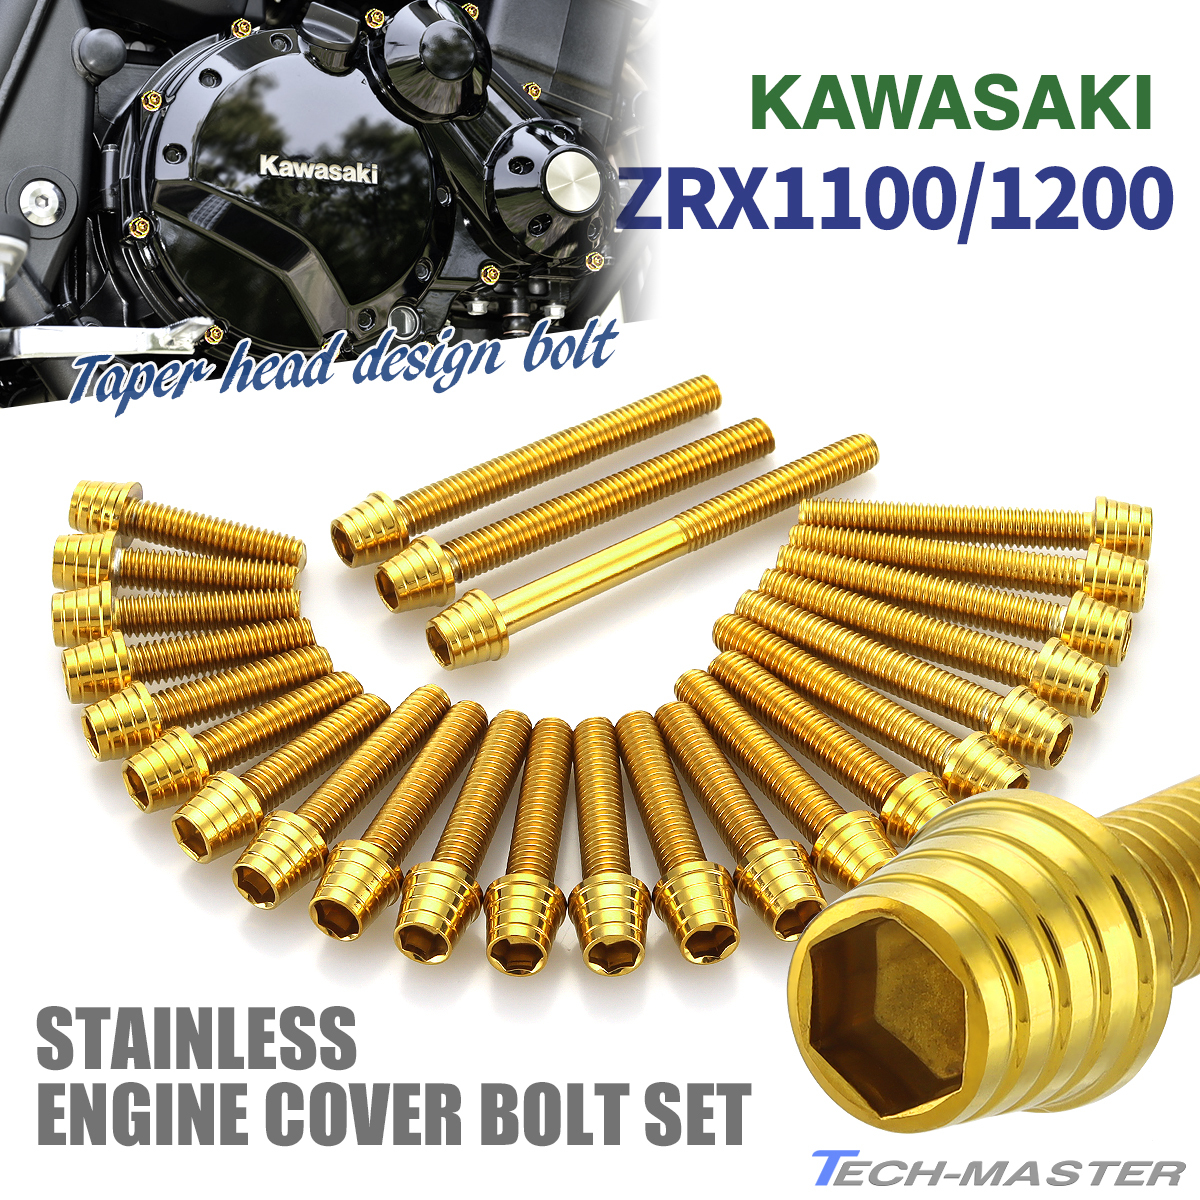 ZRX1200/DAEG ZRX1100 exclusive use bolt engine cover crankcase 25 pcs set made of stainless steel Kawasaki car Gold color TB8102